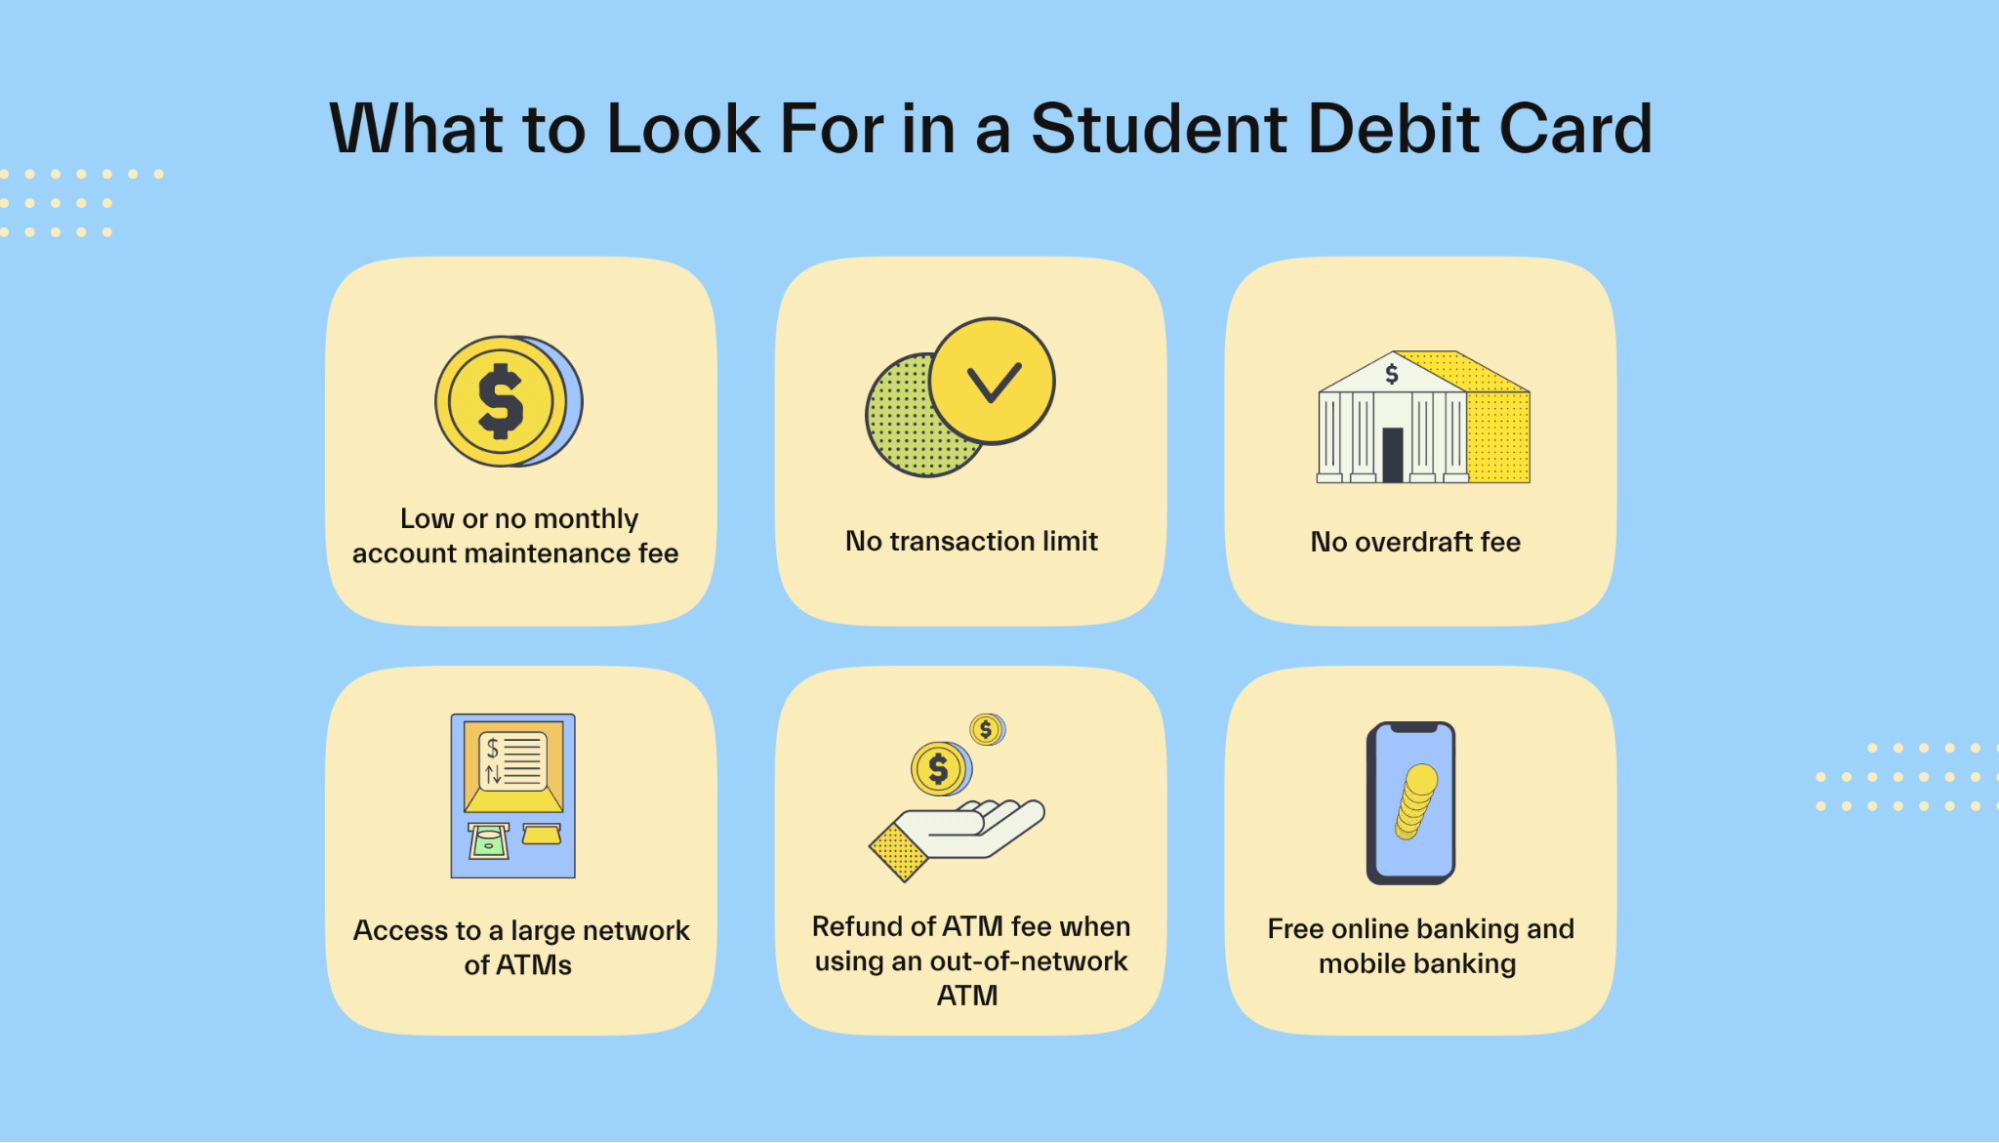 What to Look For in a Student Debit Card